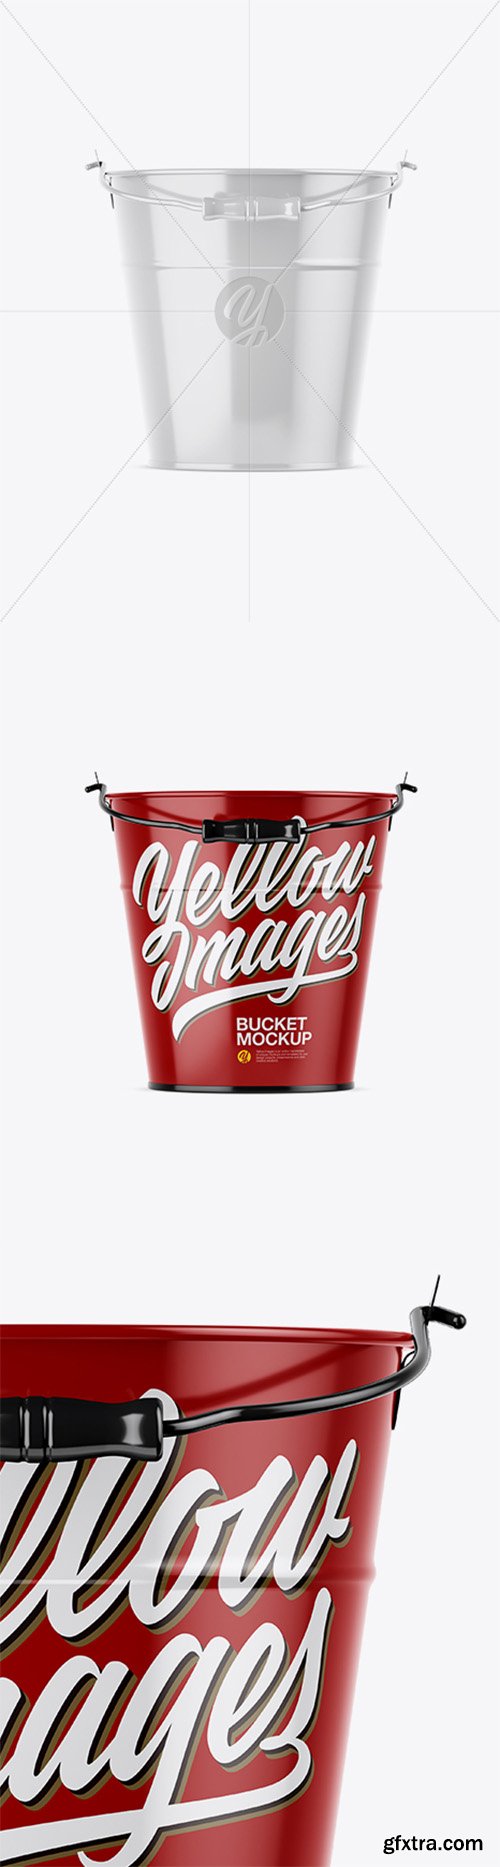 Glossy Bucket Mockup - Front View 22354